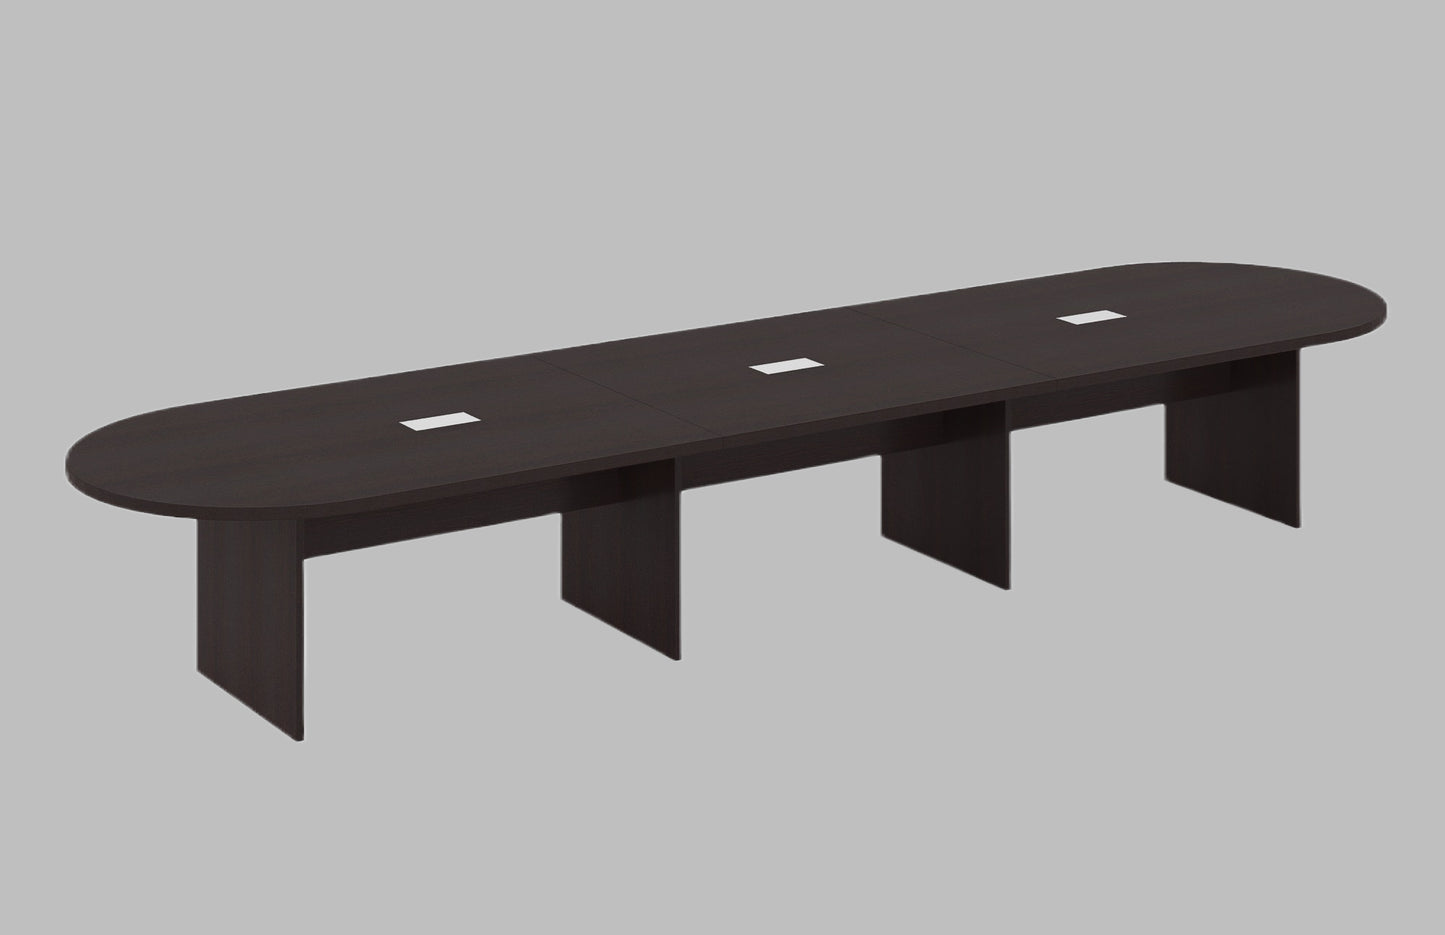 16FT Espresso racetrack shaped table